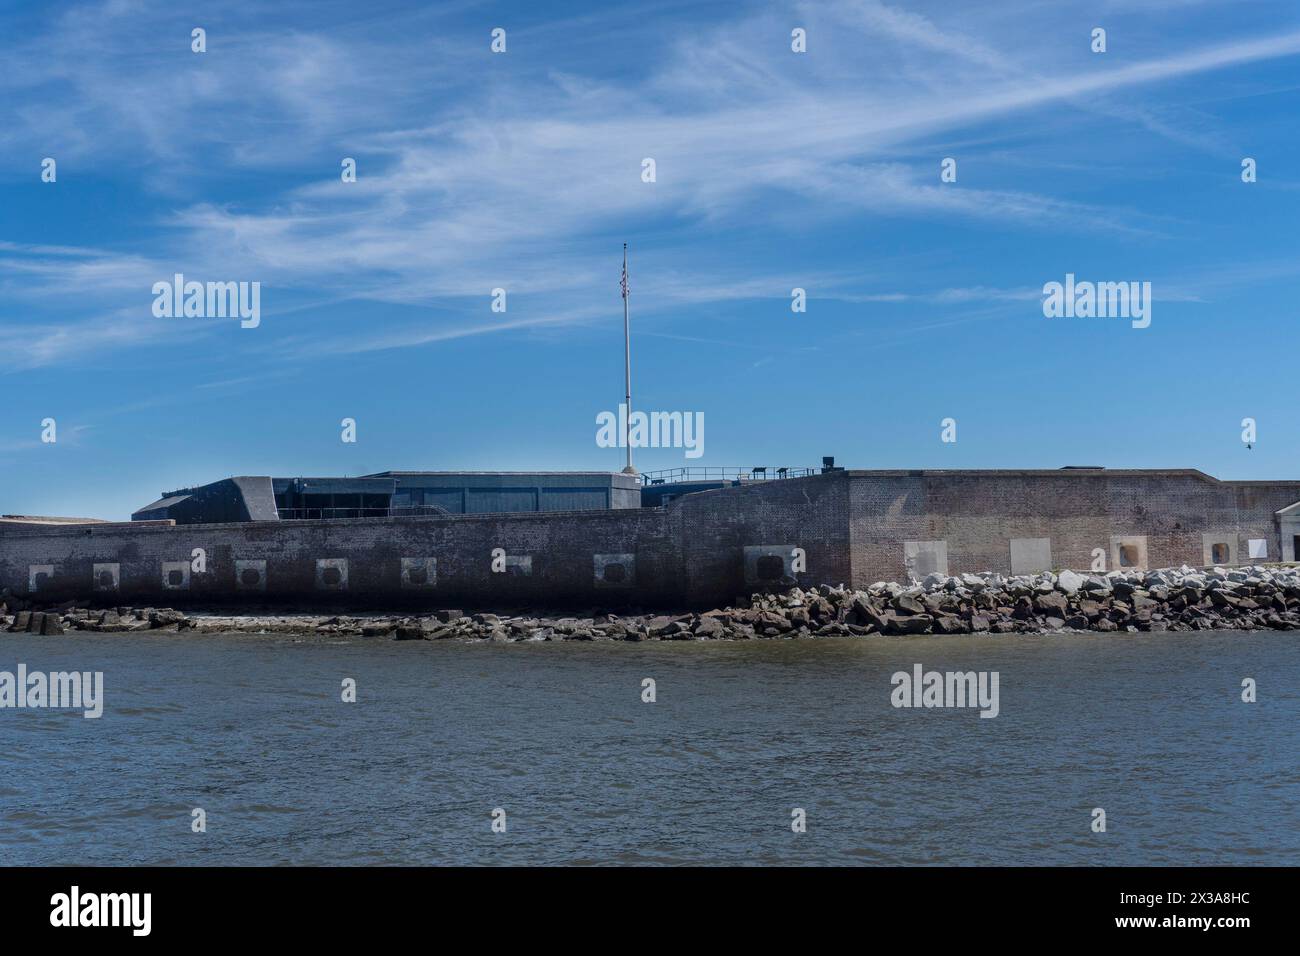 Fort Sumter as seen from a ferry boat near Charleston, SC Stock Photo